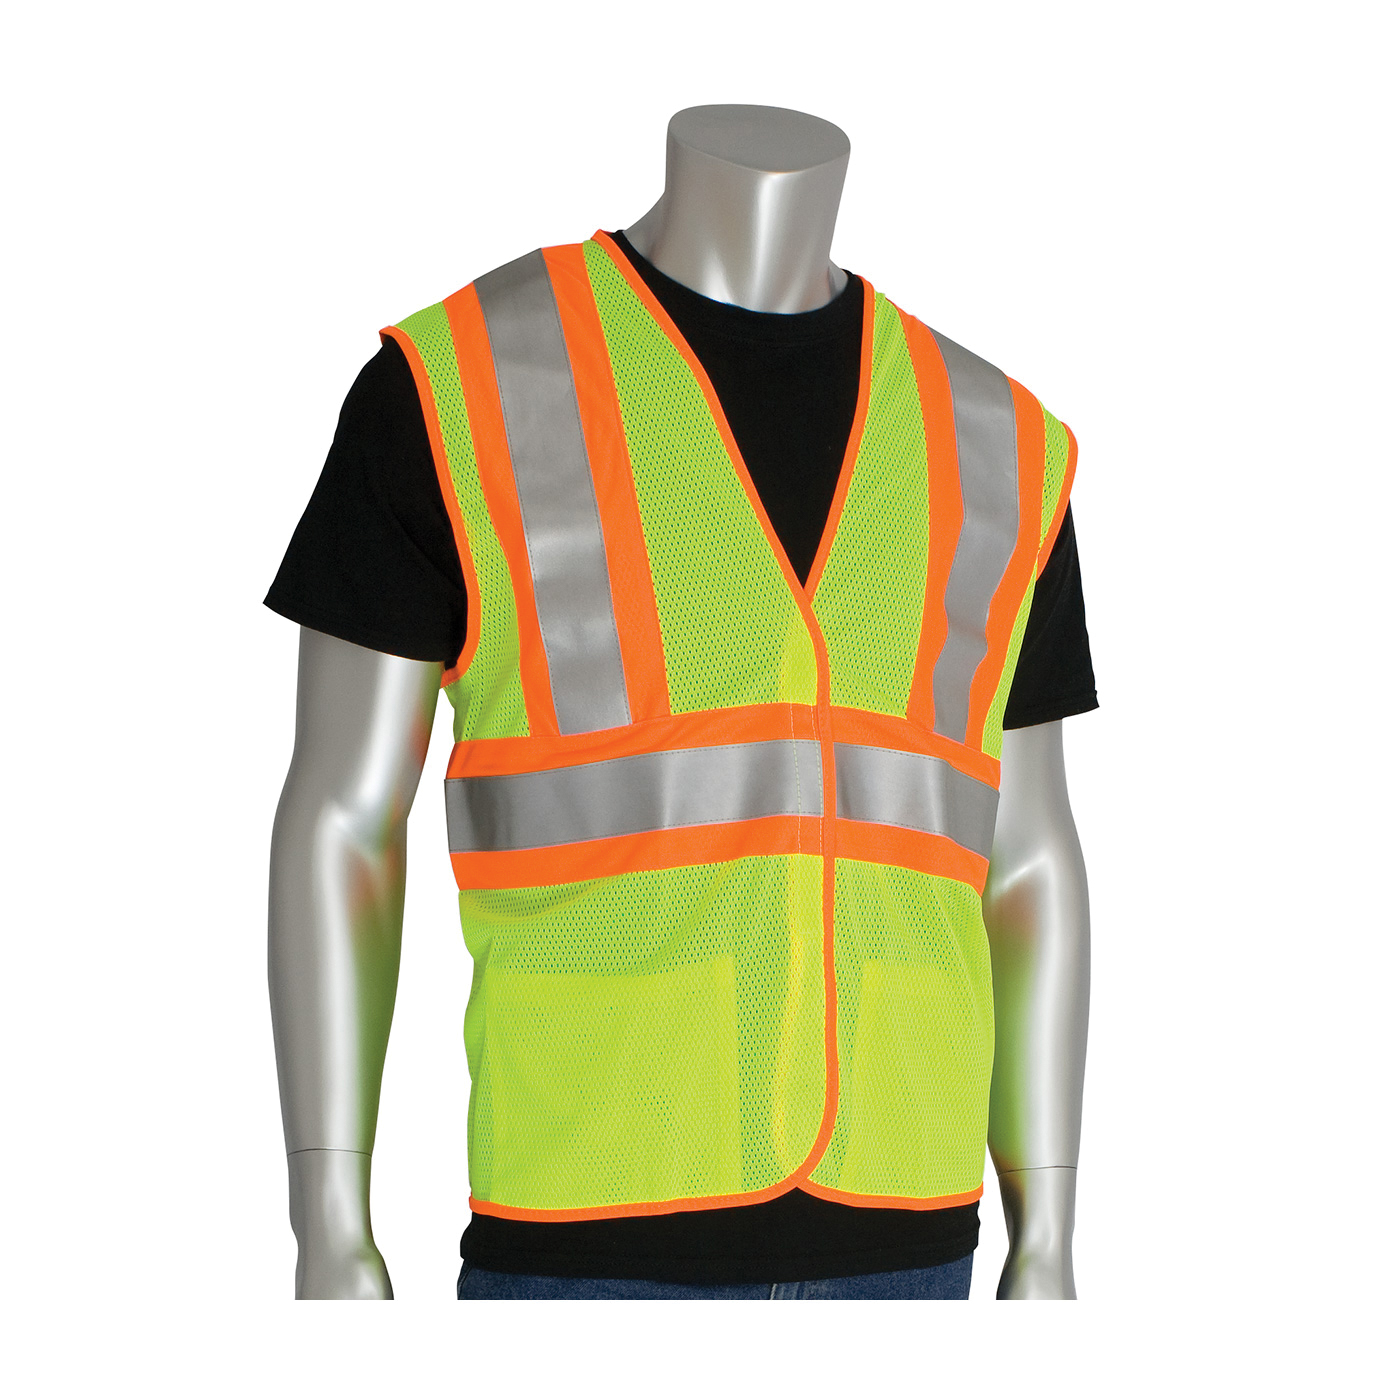 PIP® 305-MVFRLY-2X/3X 2-Tone FR Treated Safety Vest, 2XL/3XL, Hi-Viz Lime Yellow, Polyester, Hook and Loop Closure, 2 Pockets, ANSI Class: Class 2, Specifications Met: ANSI Specified